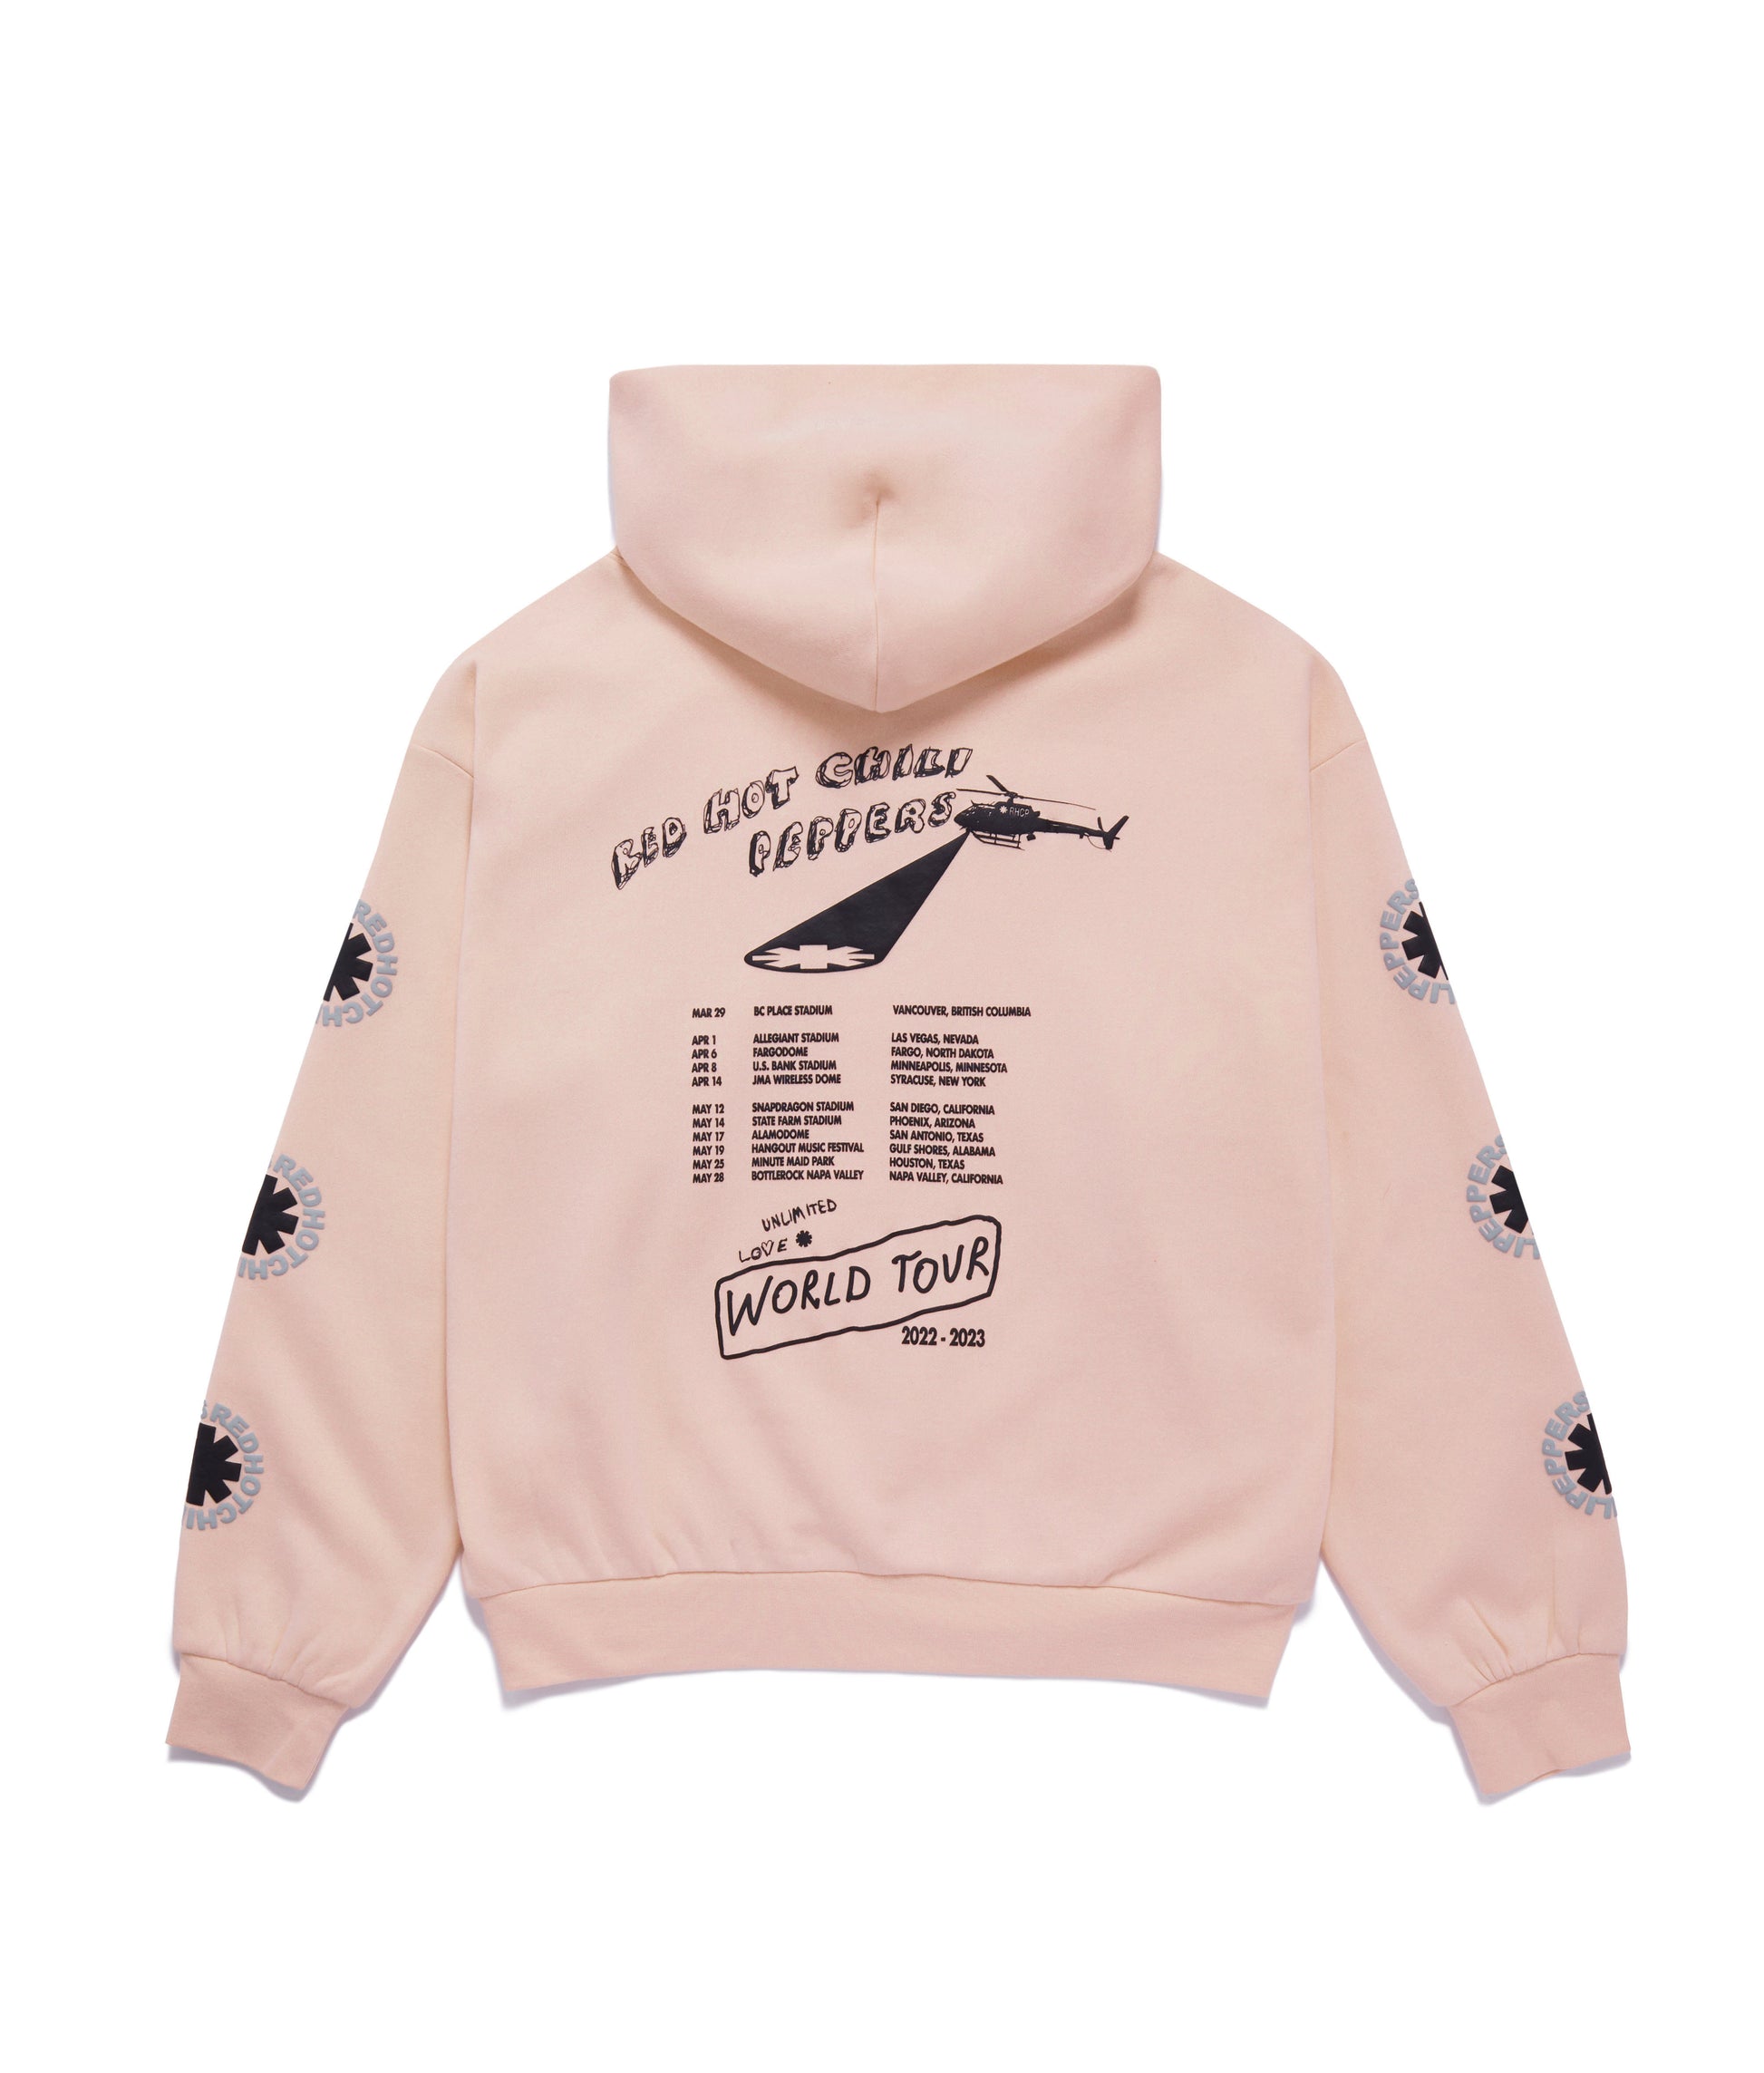 Sexy Time Hoodie – Red Hot Chili Peppers